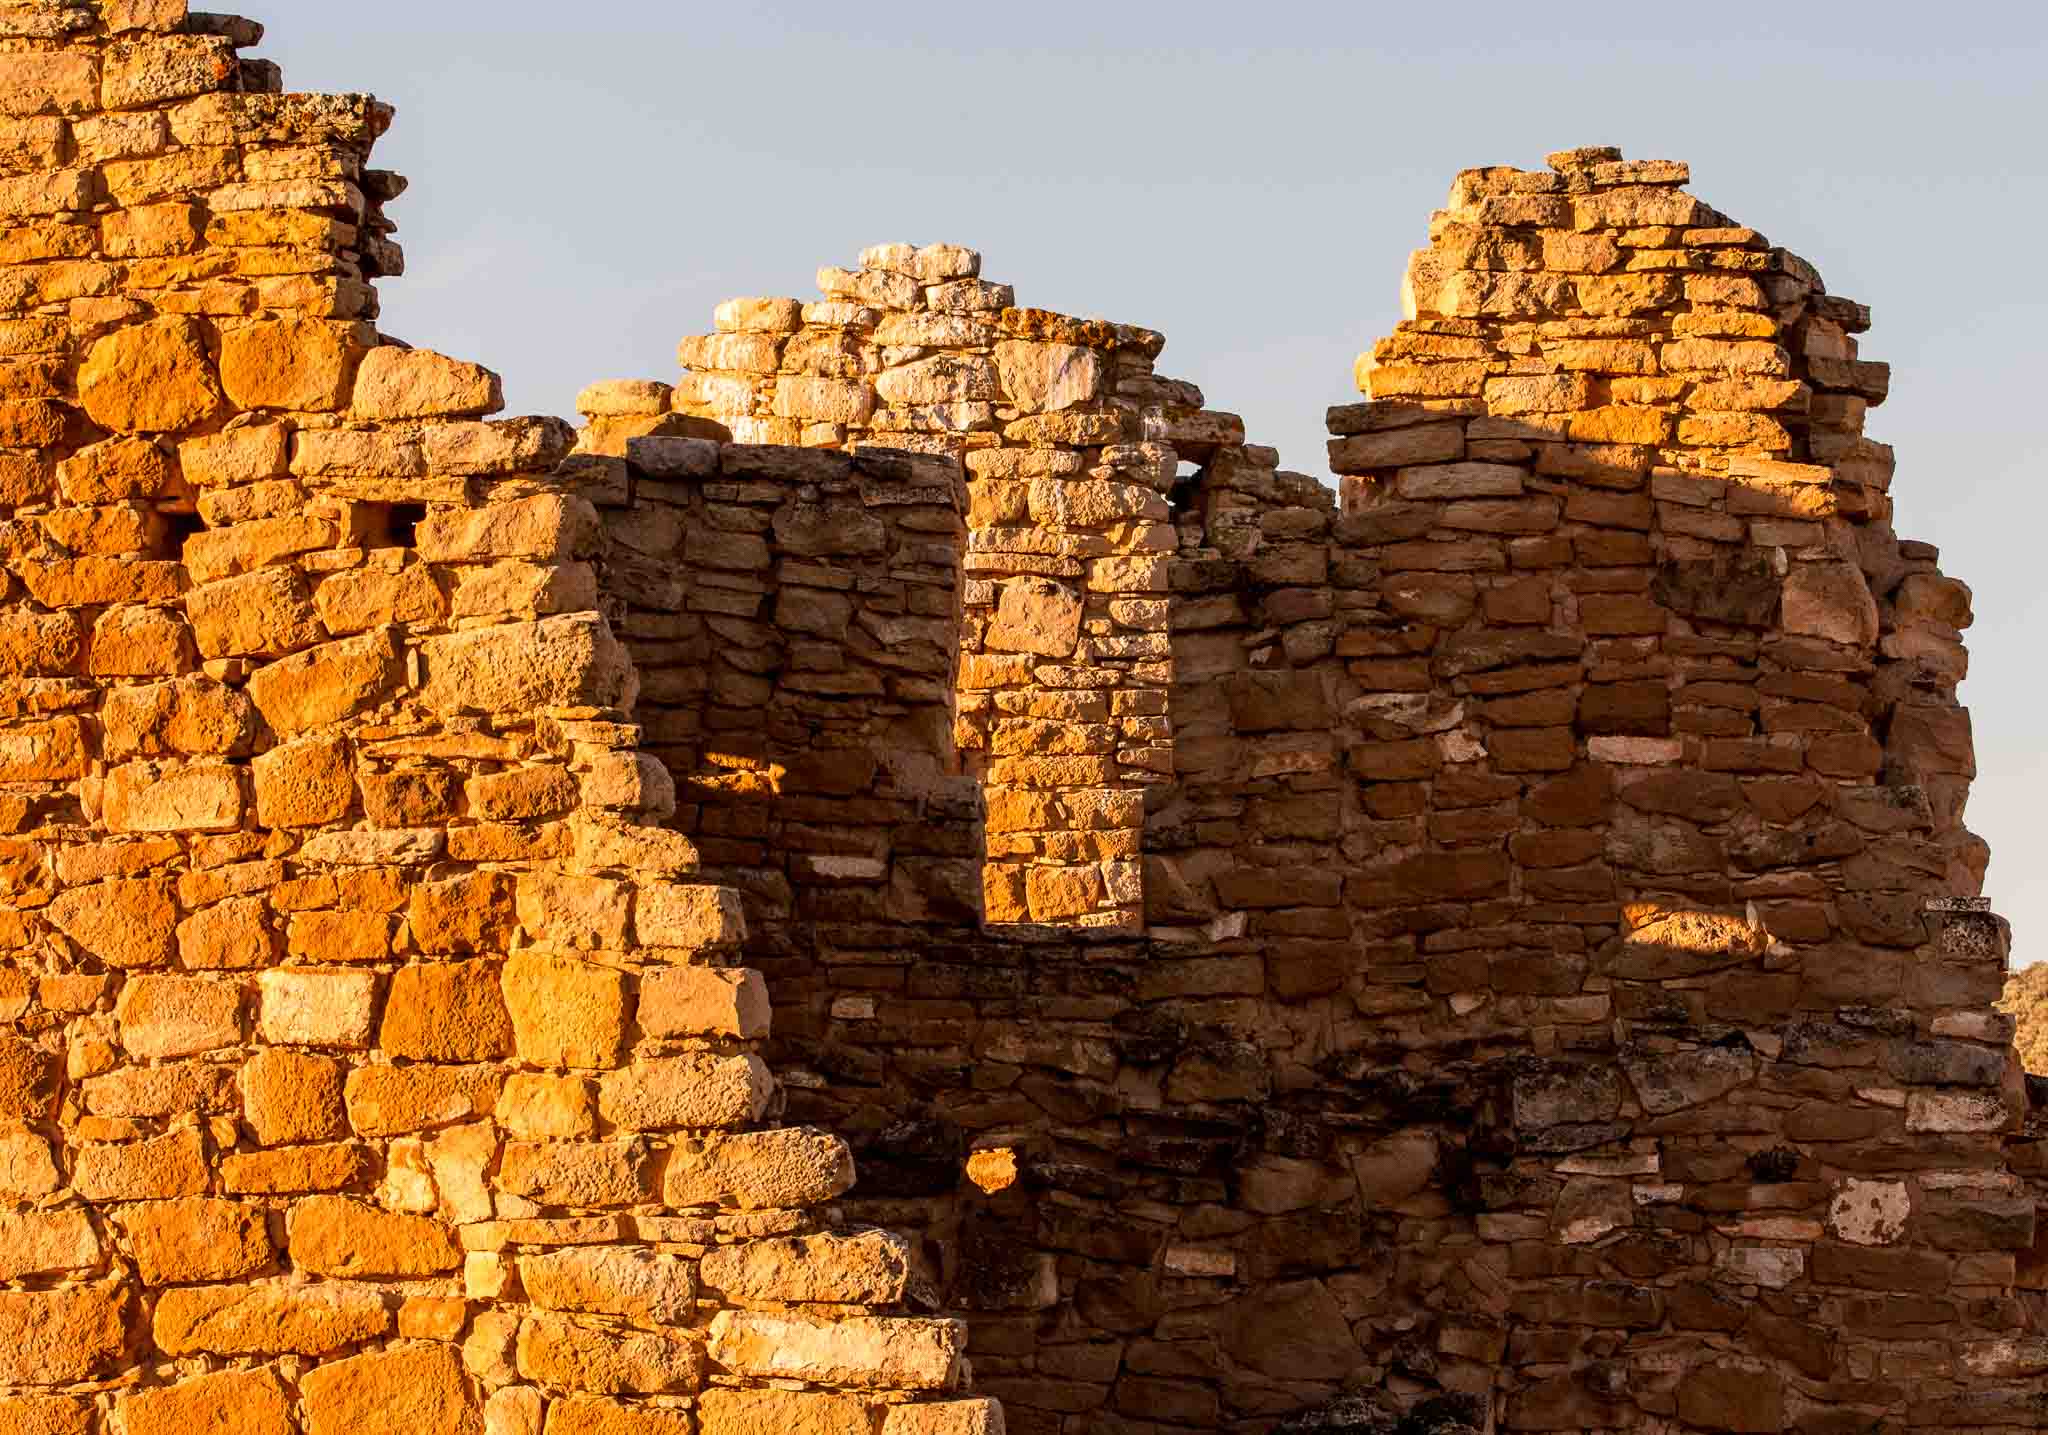 Hovenweep Castle at sunrise, Hovenweep National Monument, Aneth UT, October 11, 2014